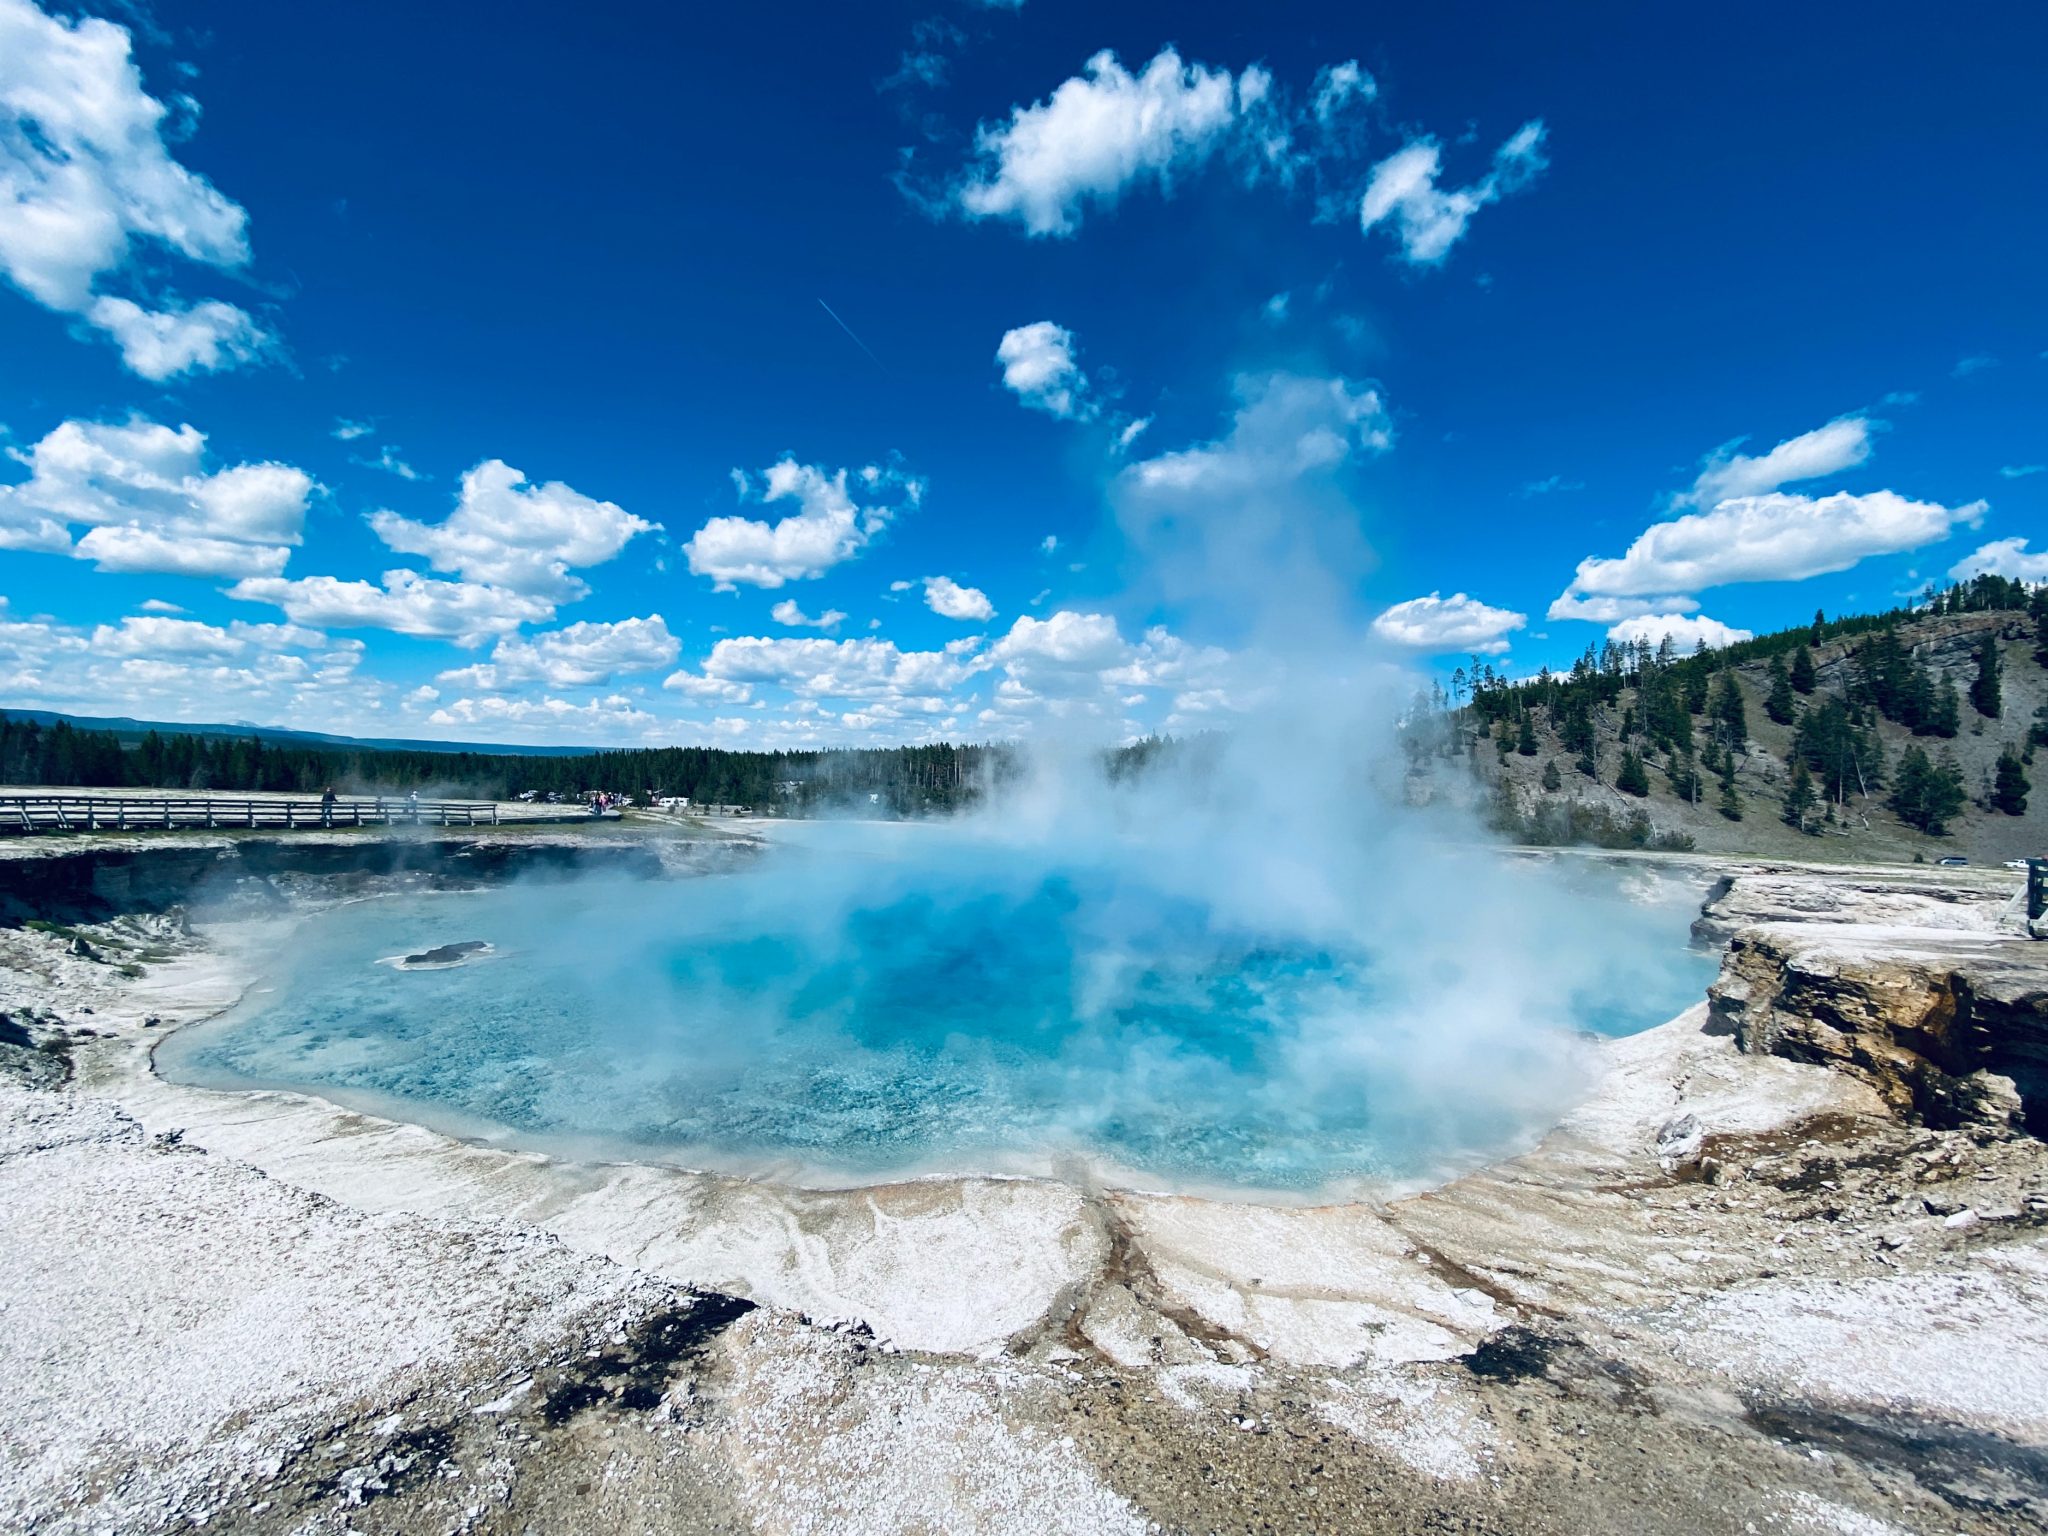 Yellowstone National Park the most famous national parks in the